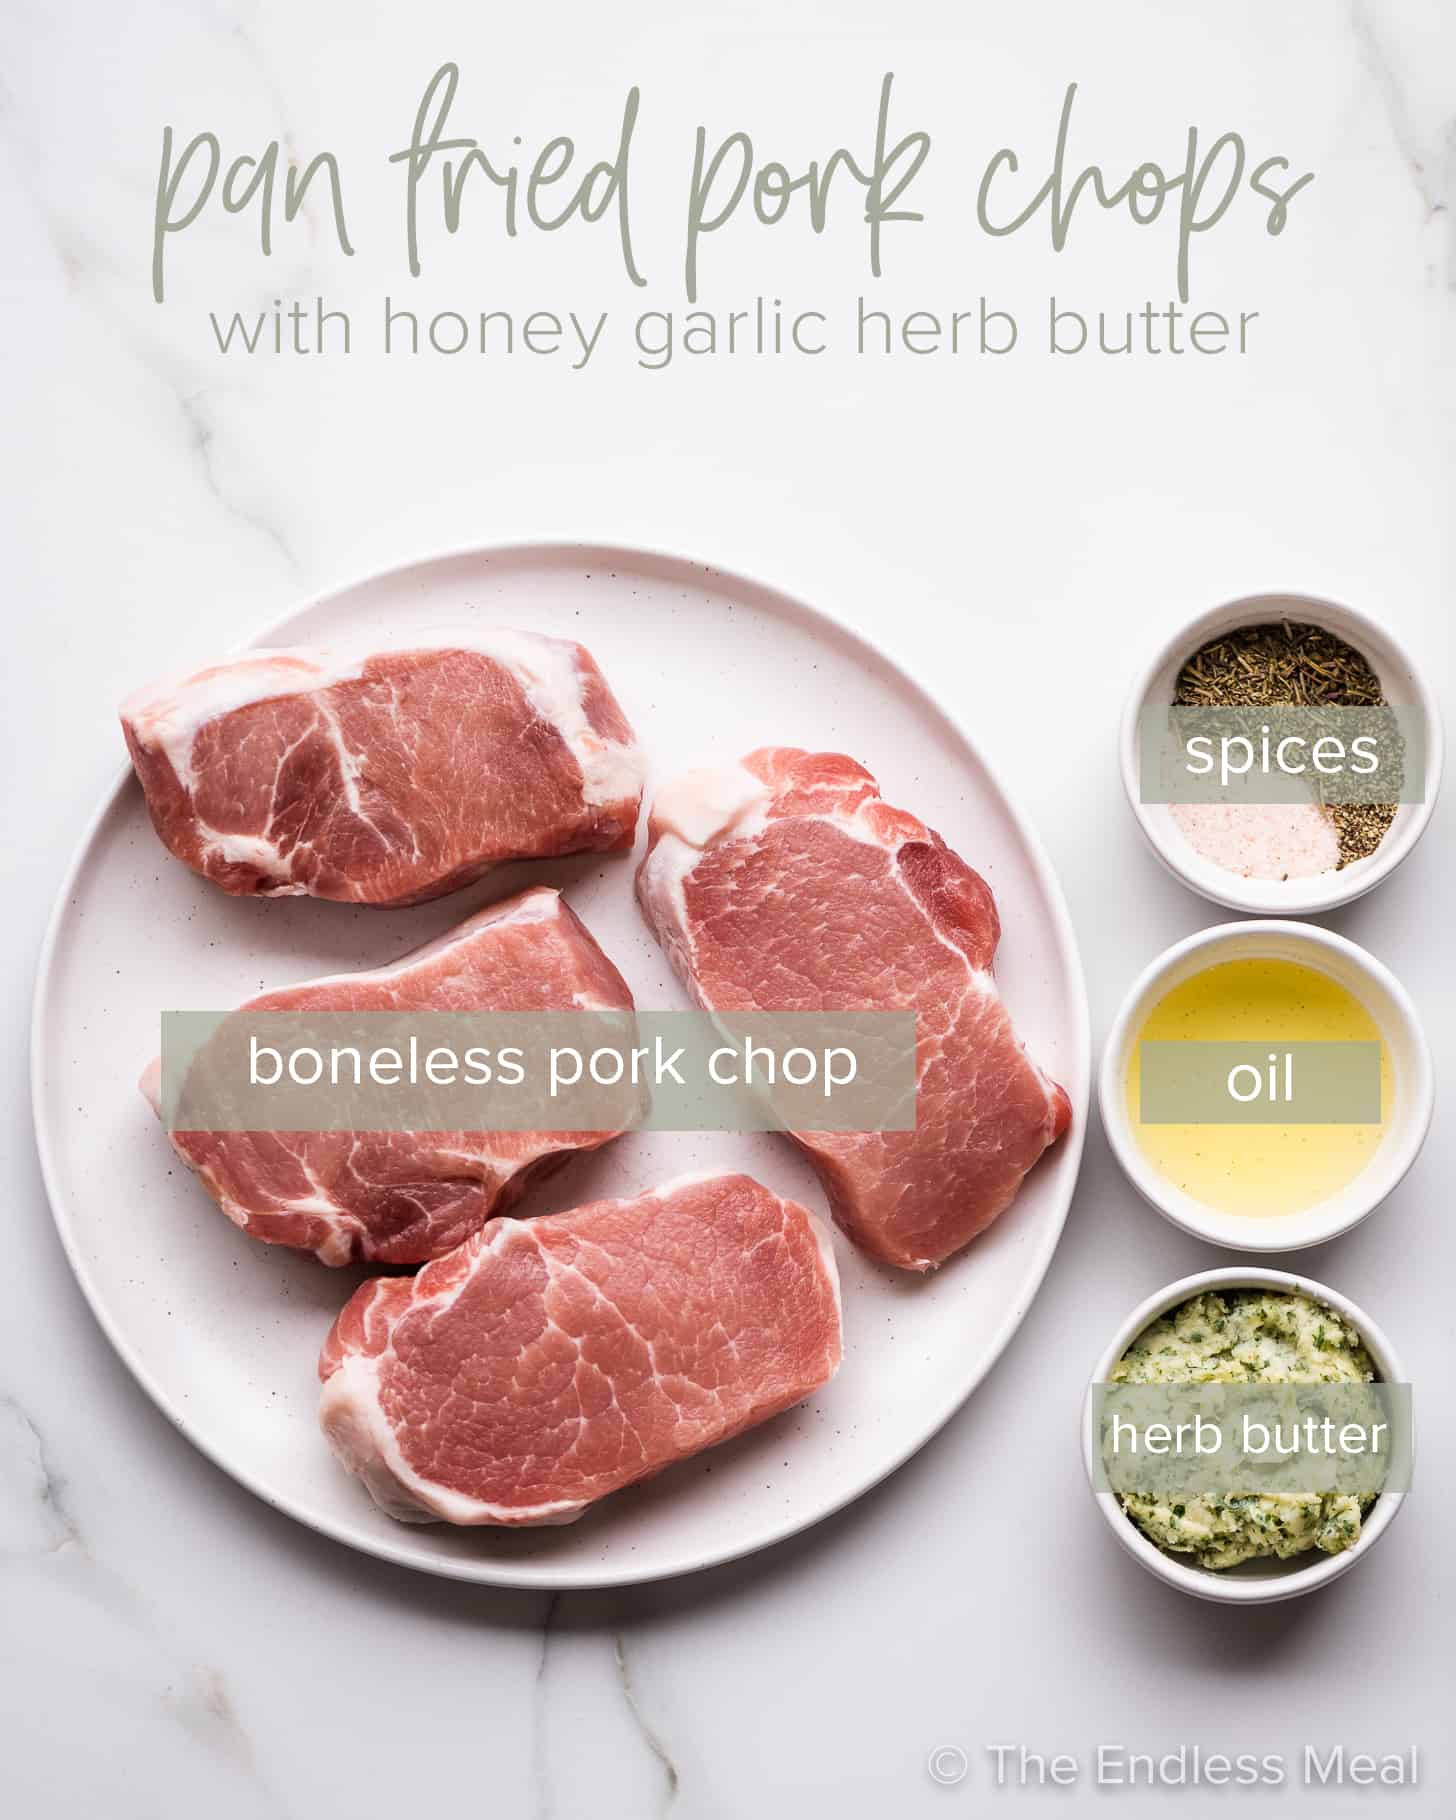 The ingredients needed to make Pan Fried Pork Chops